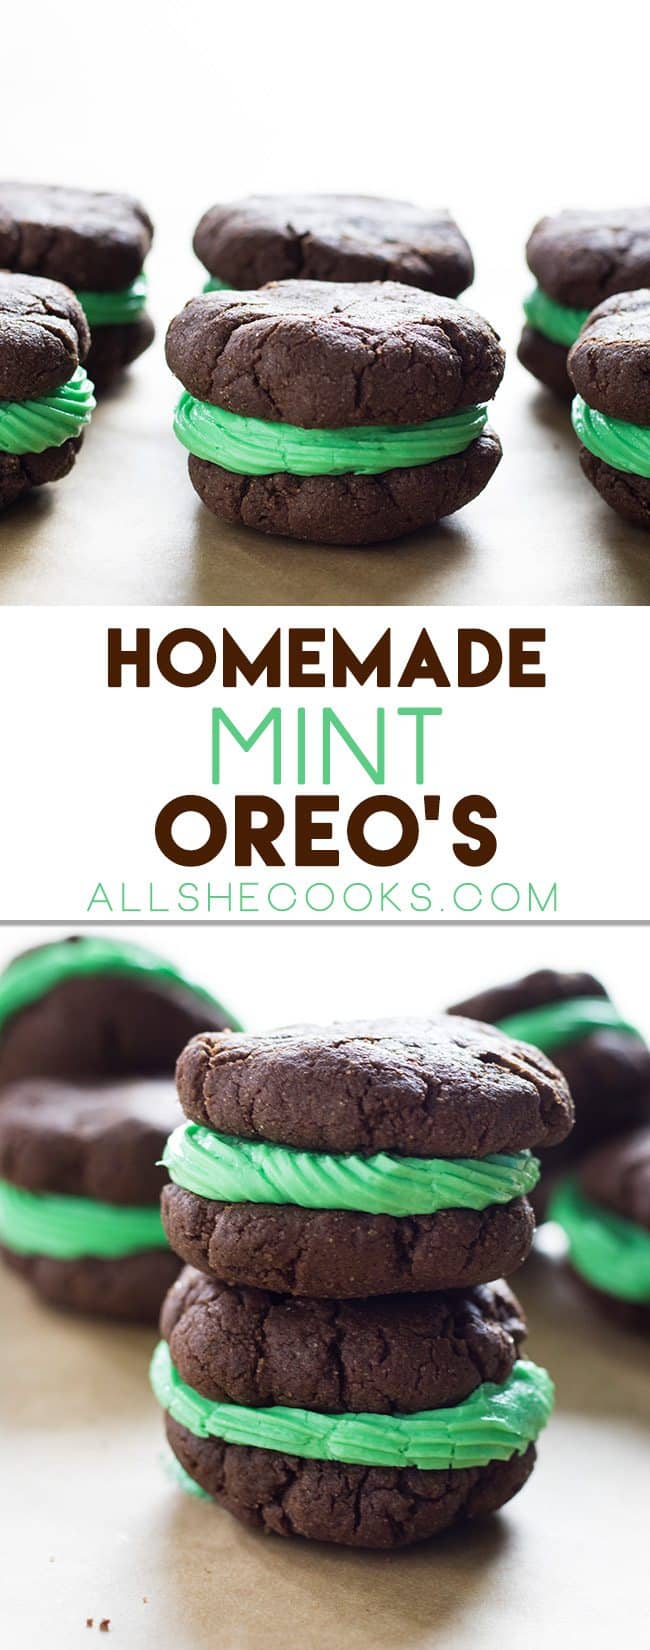 Enjoy these Homemade Mint Oreos stuffed cookies that are perfect for dessert. You will love these insanely delicious cookies.